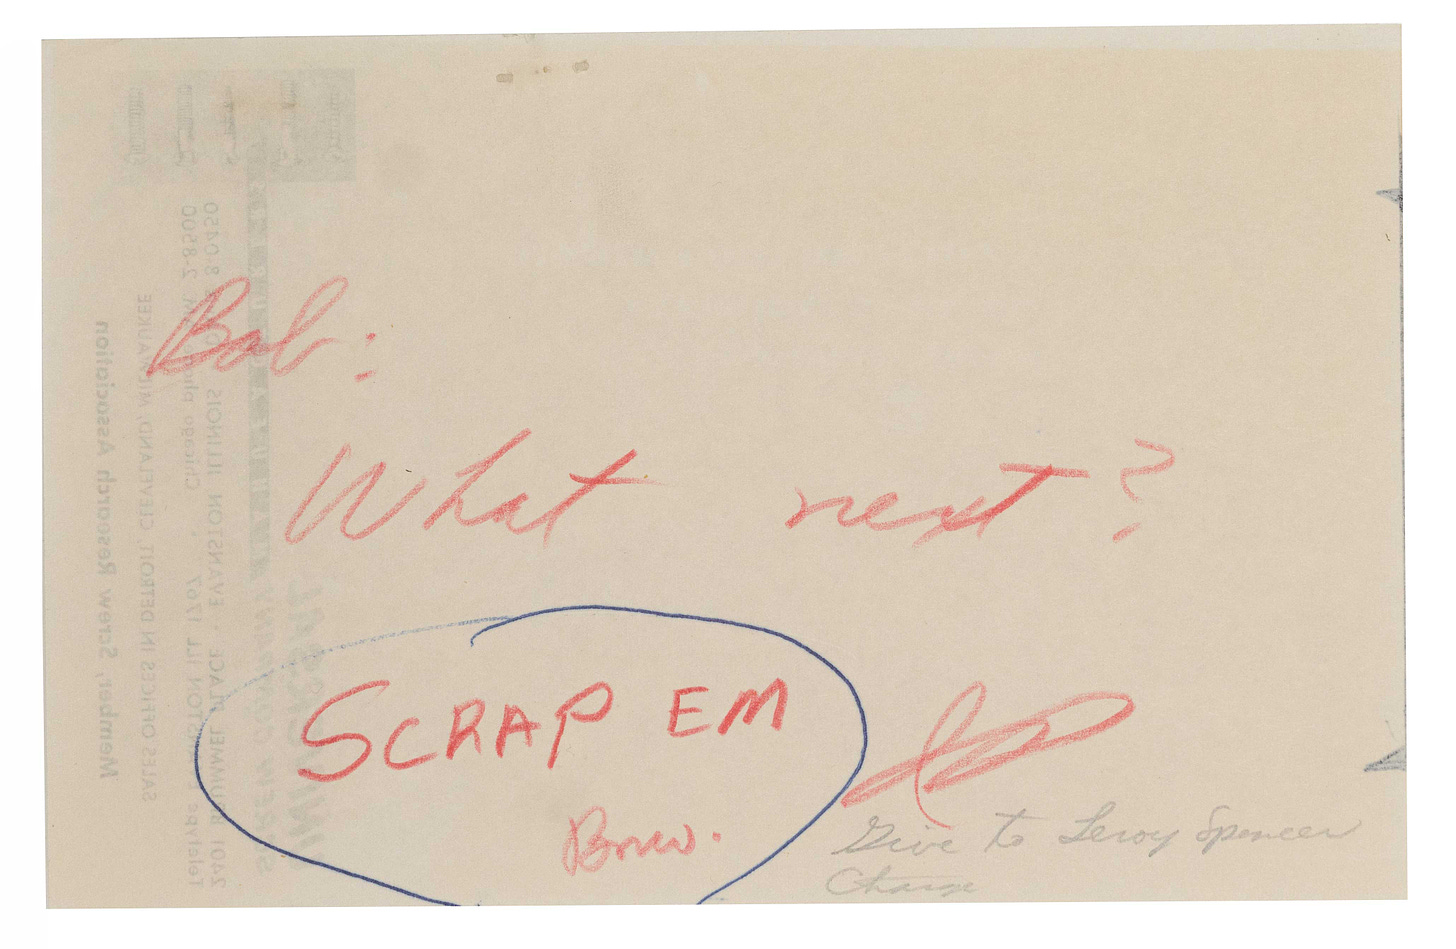 A handwritten note from the 7868 file in the collection of Wurlitzer engineering drawings. It reads, in red pencil: "Bob: What next?" then, also in red pencil, circled in blue ink: "SCRAP EM," and an illegible signature.